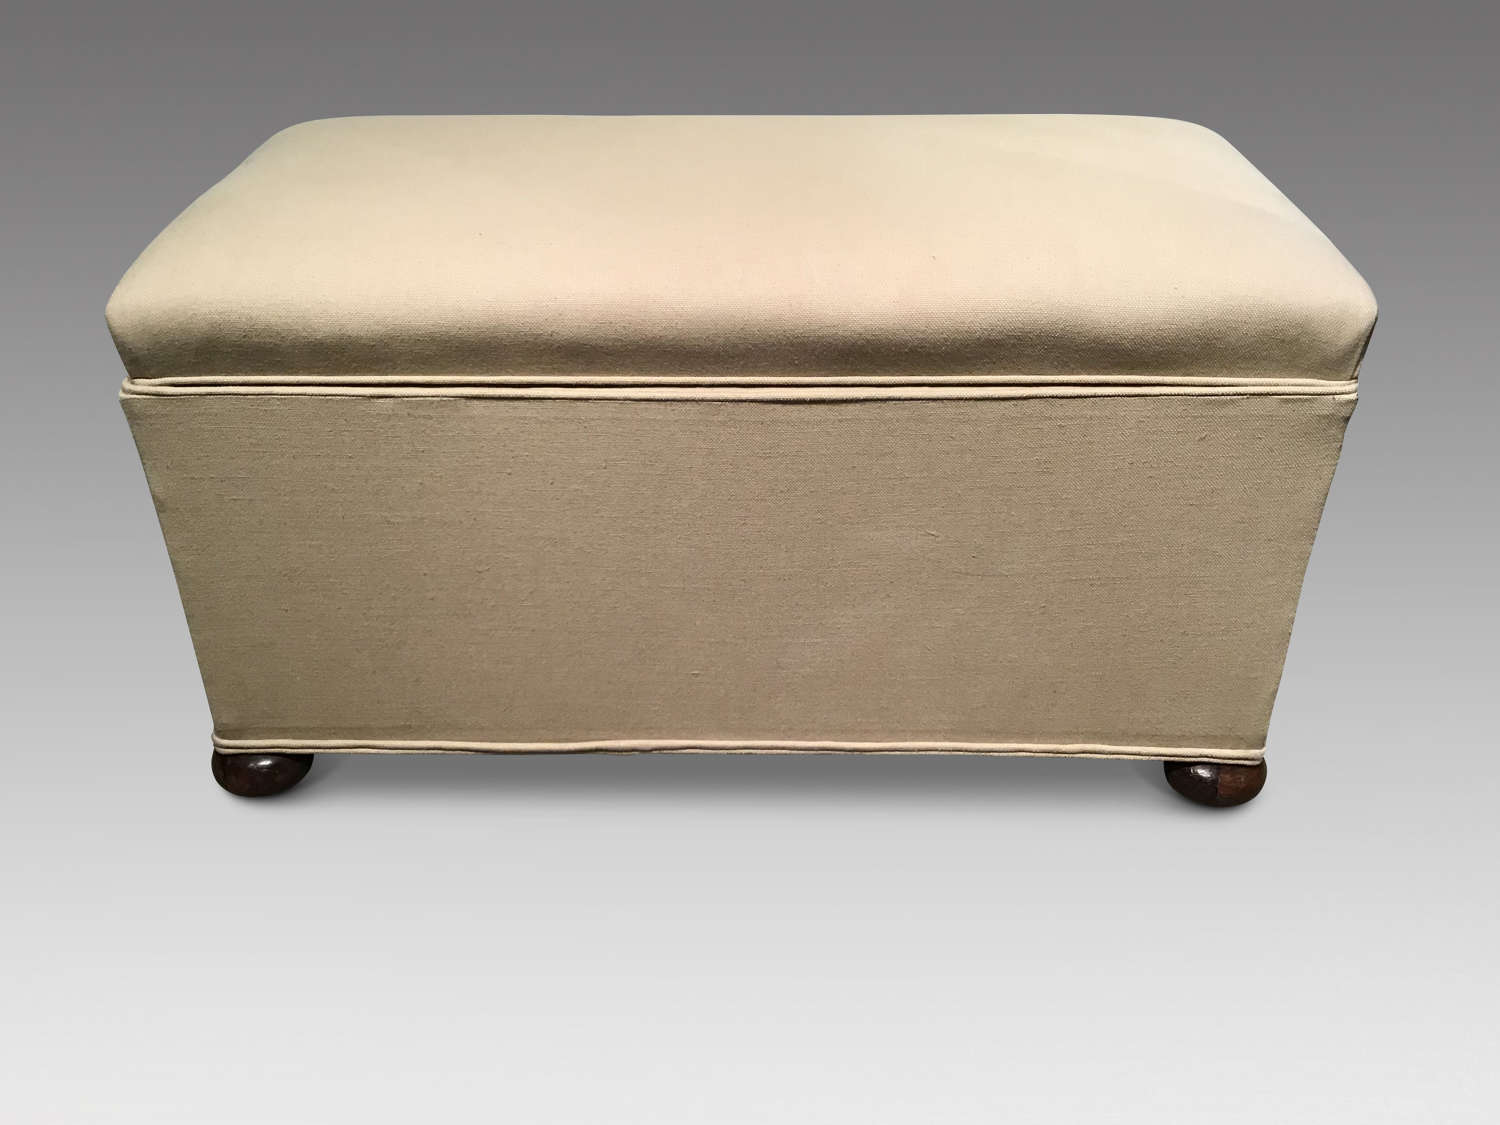 Antique upholstered ottoman